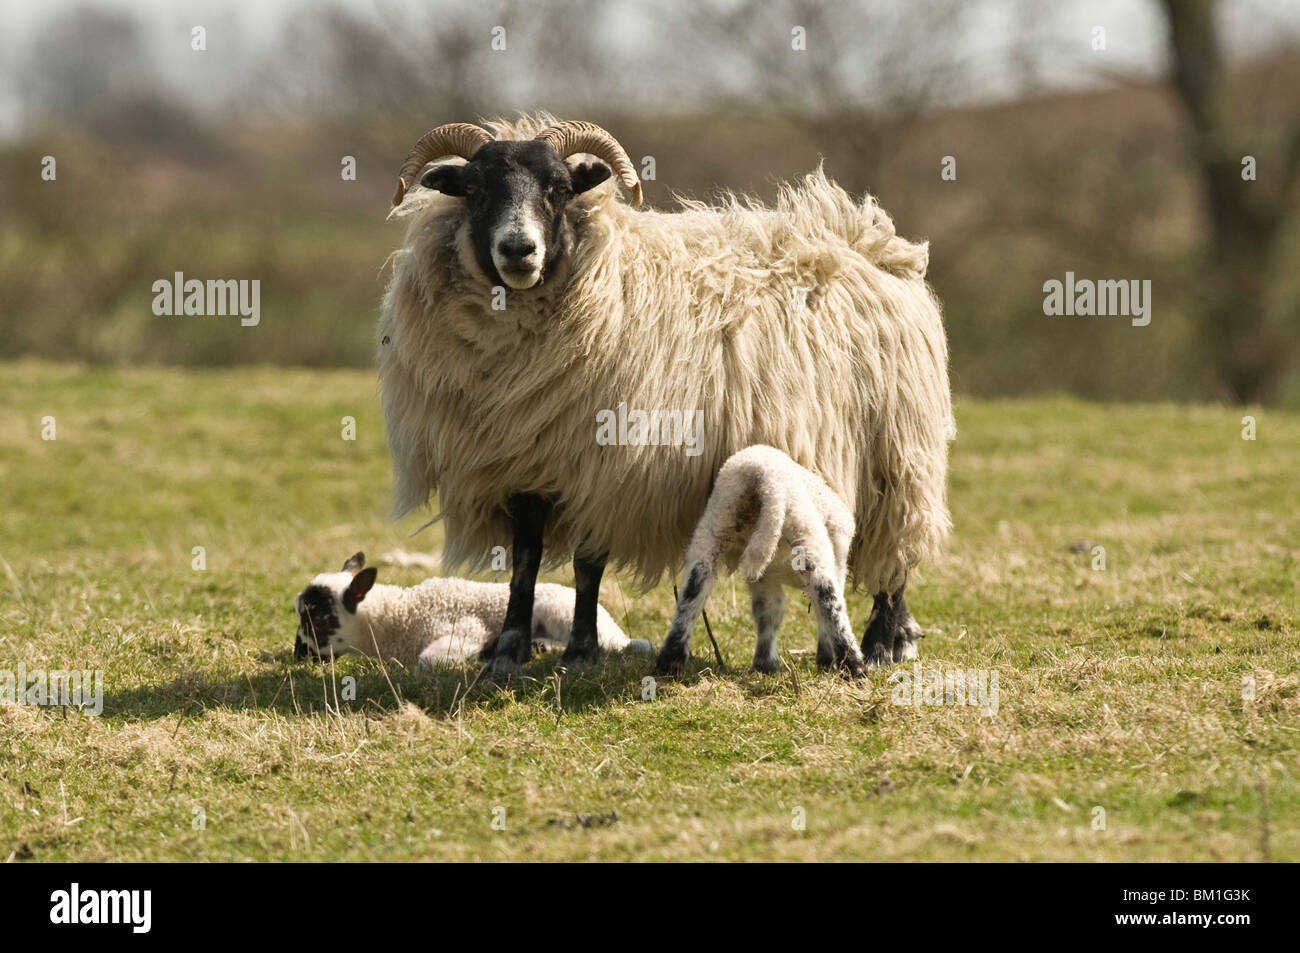 Sheep Farming Farm Countryside Arable Lambs Lambing Young Cute Horned Scotland Dumfries & Galloway Agriculture Stock Photo